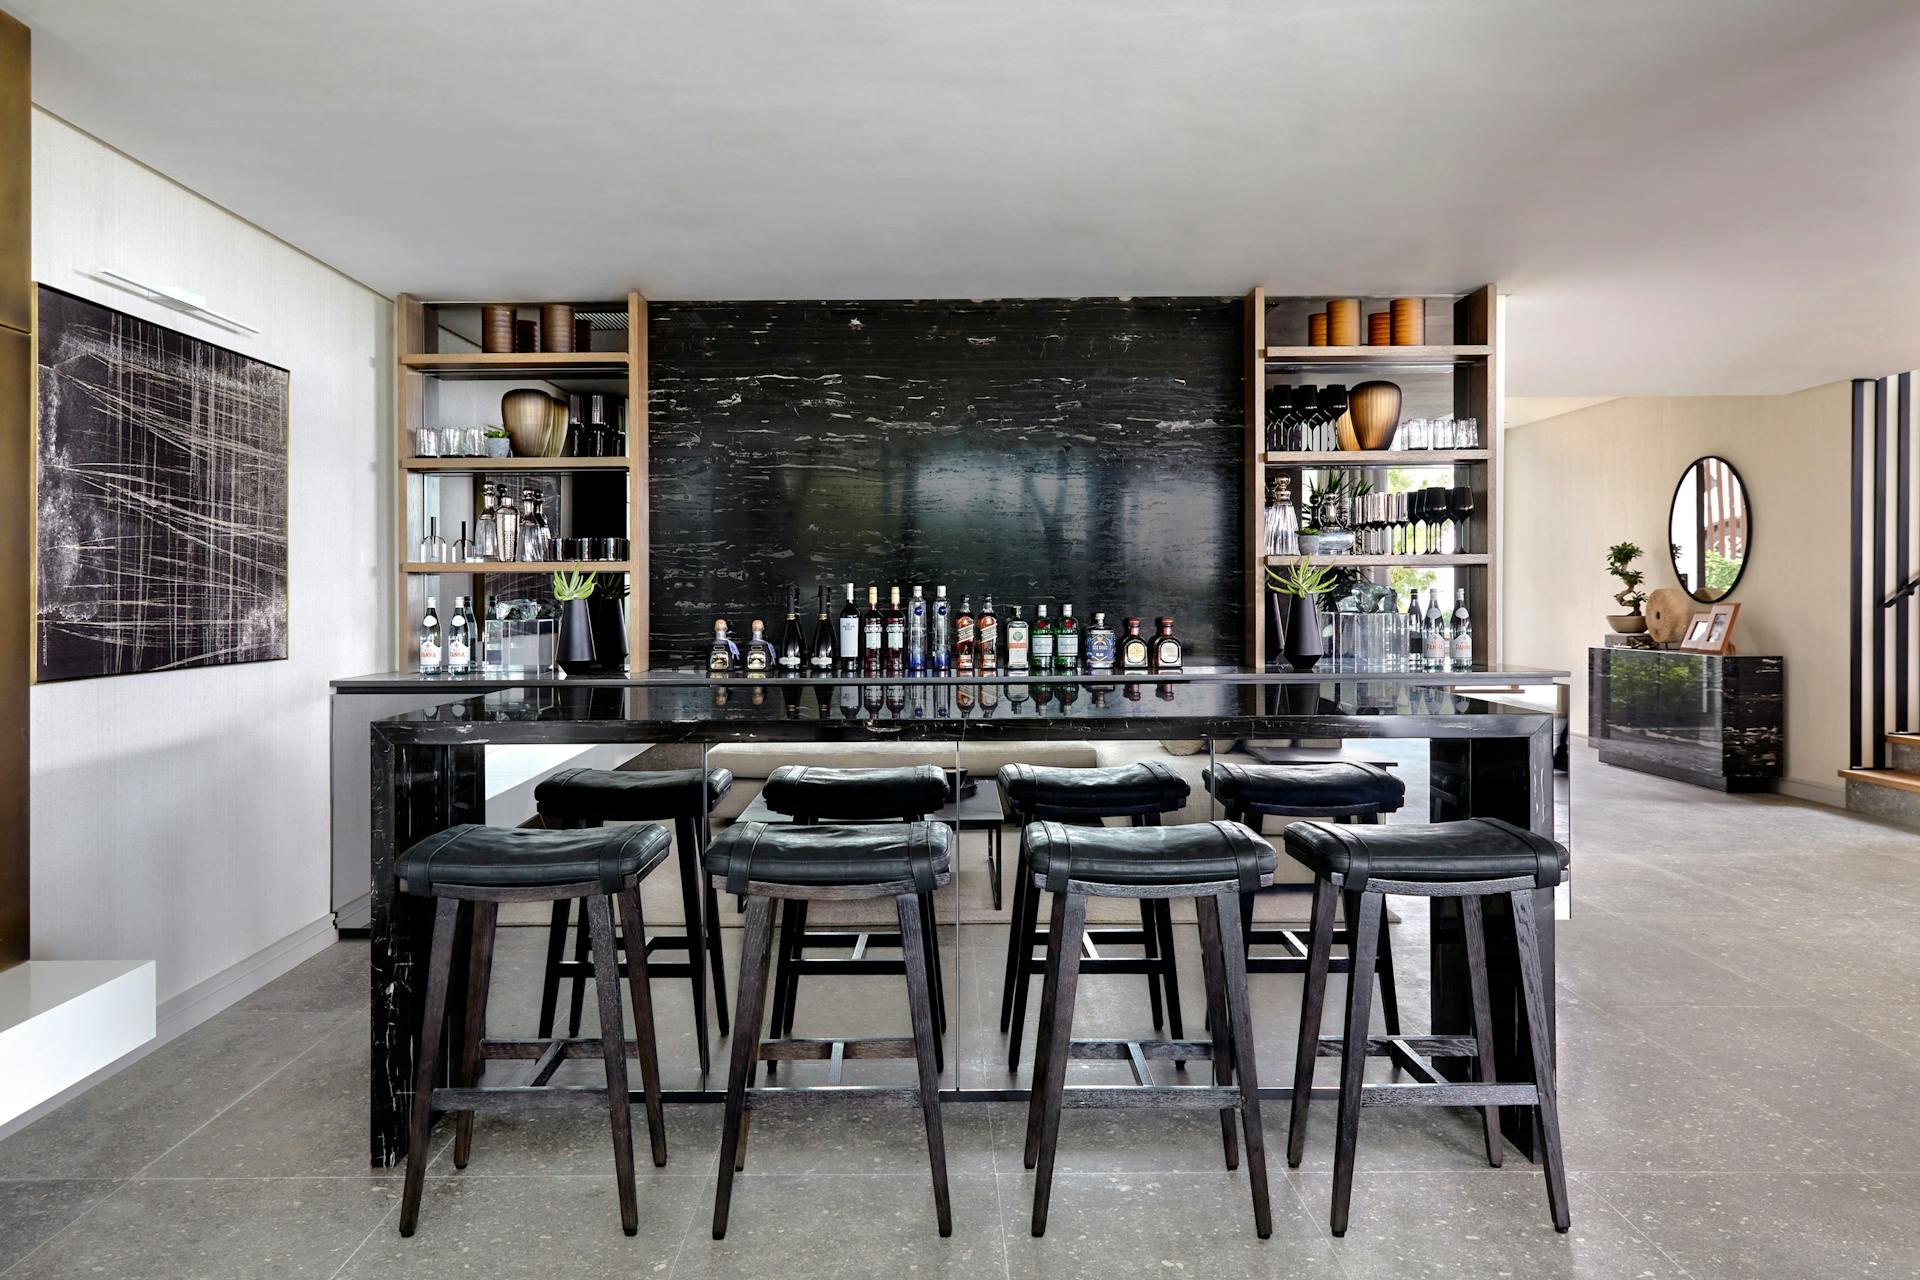 A bar area made out of black marble with 4 bar stools in the foreground and artwork to the left.